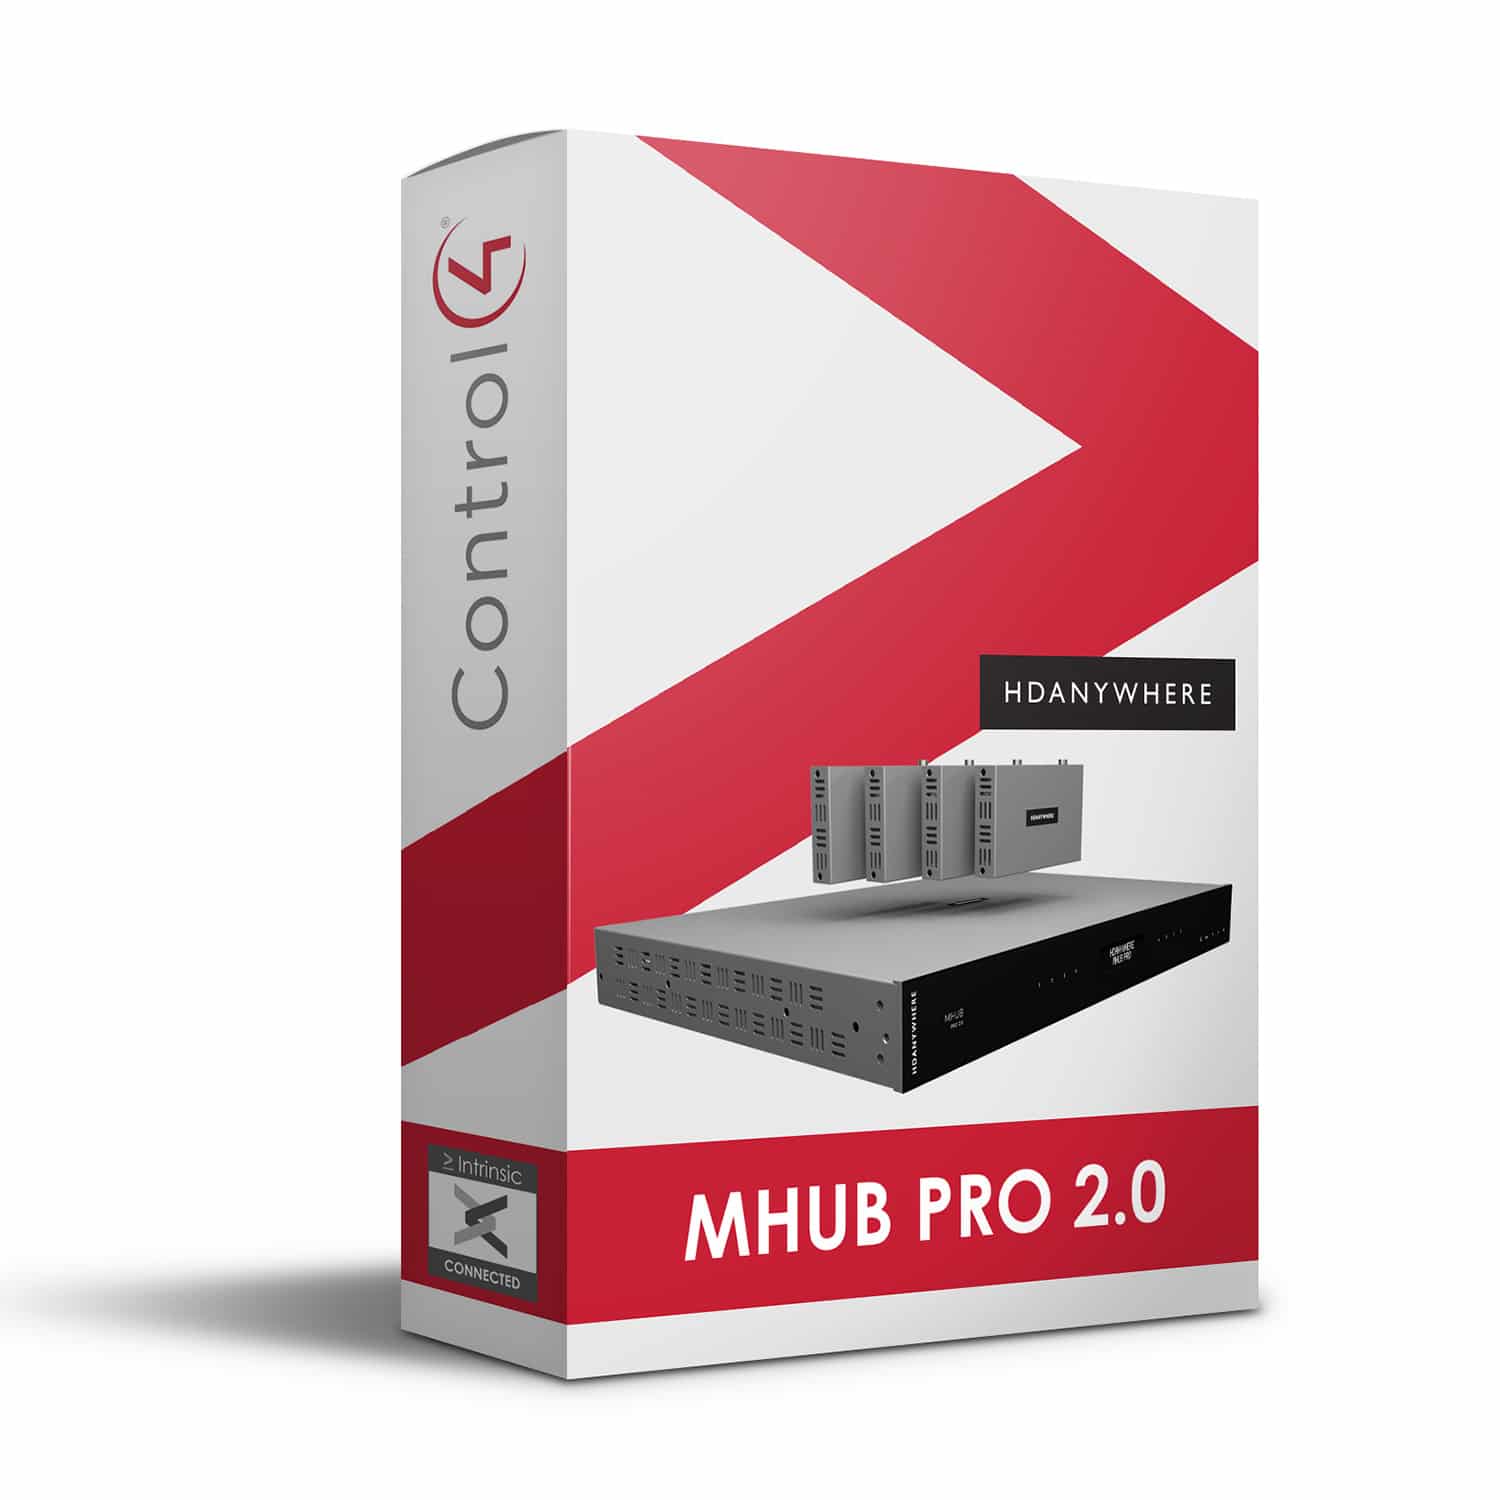 HDAnywhere MHUB PRO 2.0 Driver for Control4